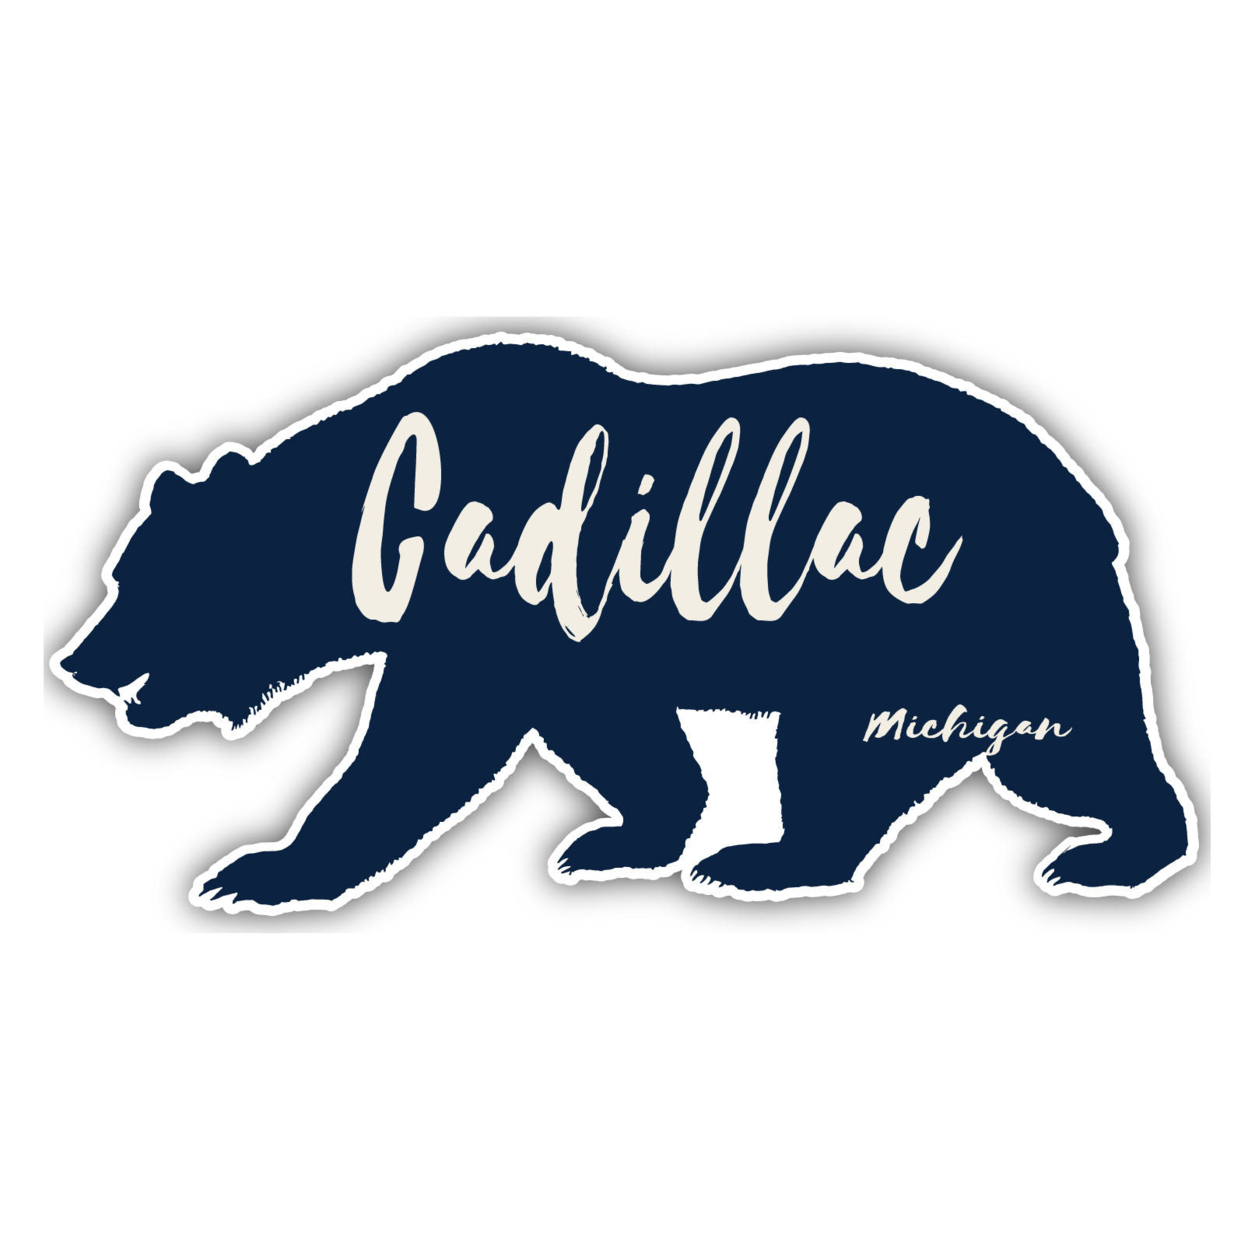 Cadillac Michigan Souvenir Decorative Stickers (Choose Theme And Size) - Single Unit, 2-Inch, Great Outdoors